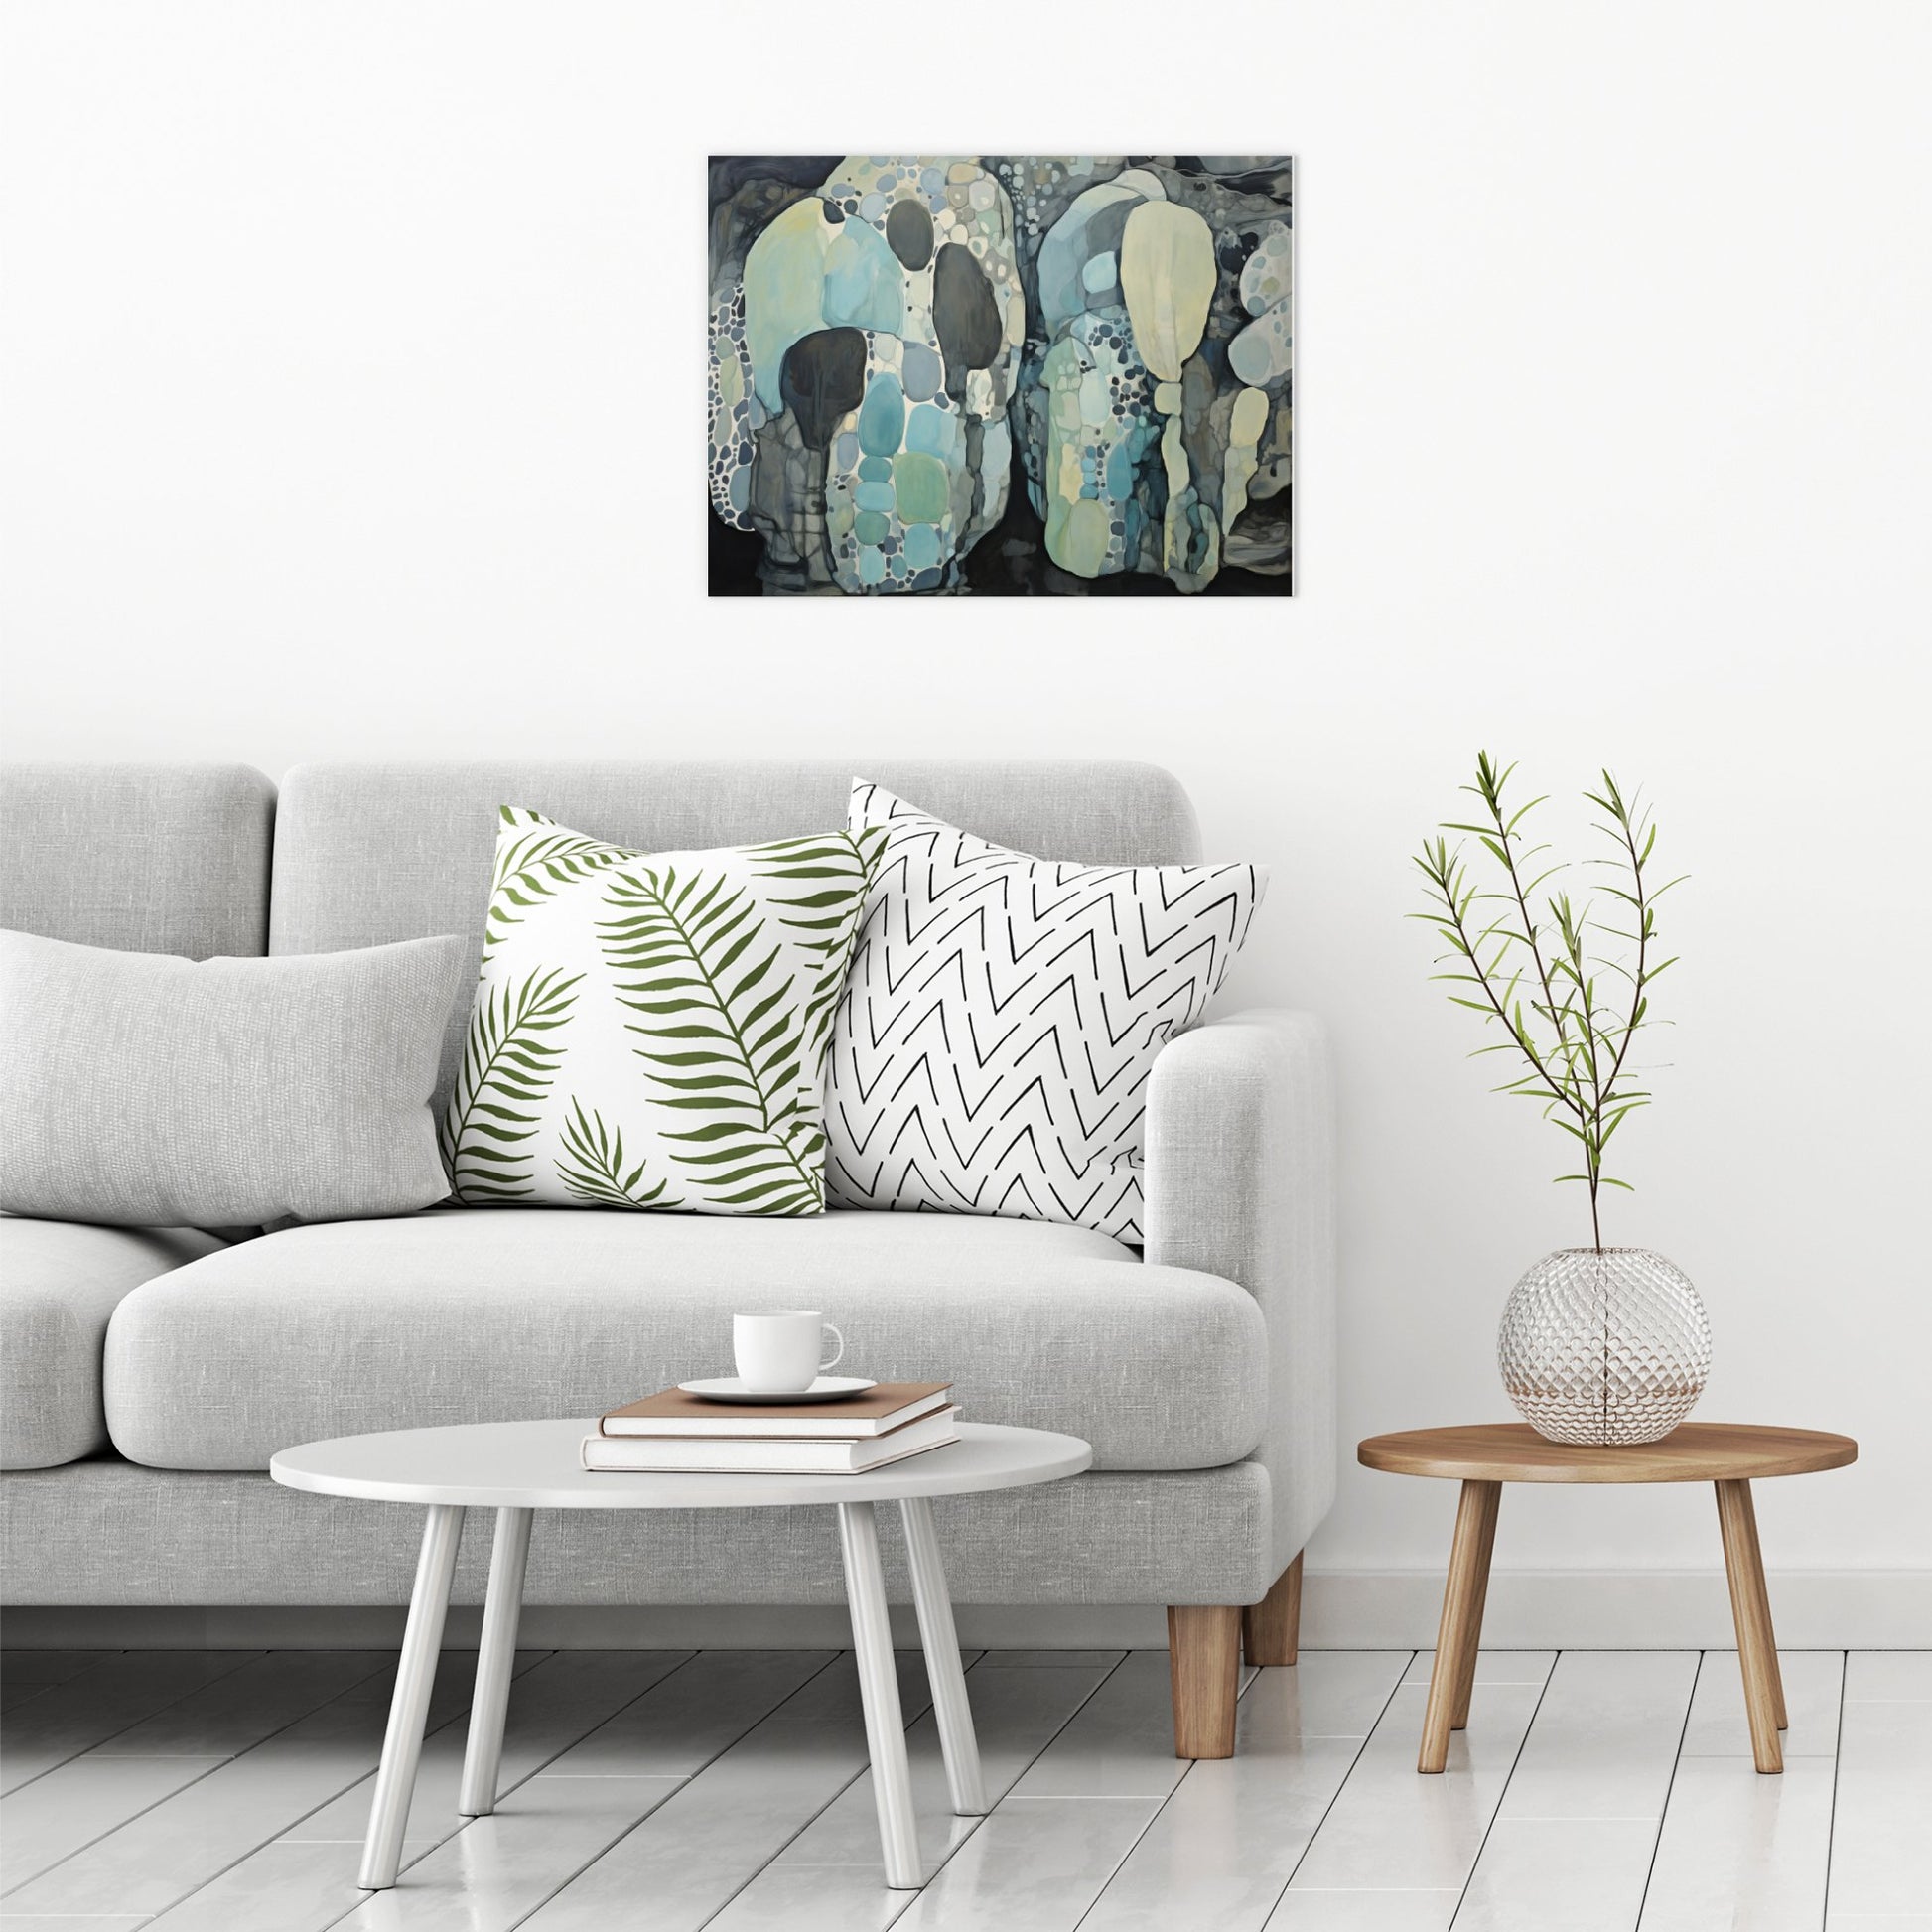 A contemporary modern room view showing a large size metal art poster display plate with printed design of a Blue Rocks Abstract Painting